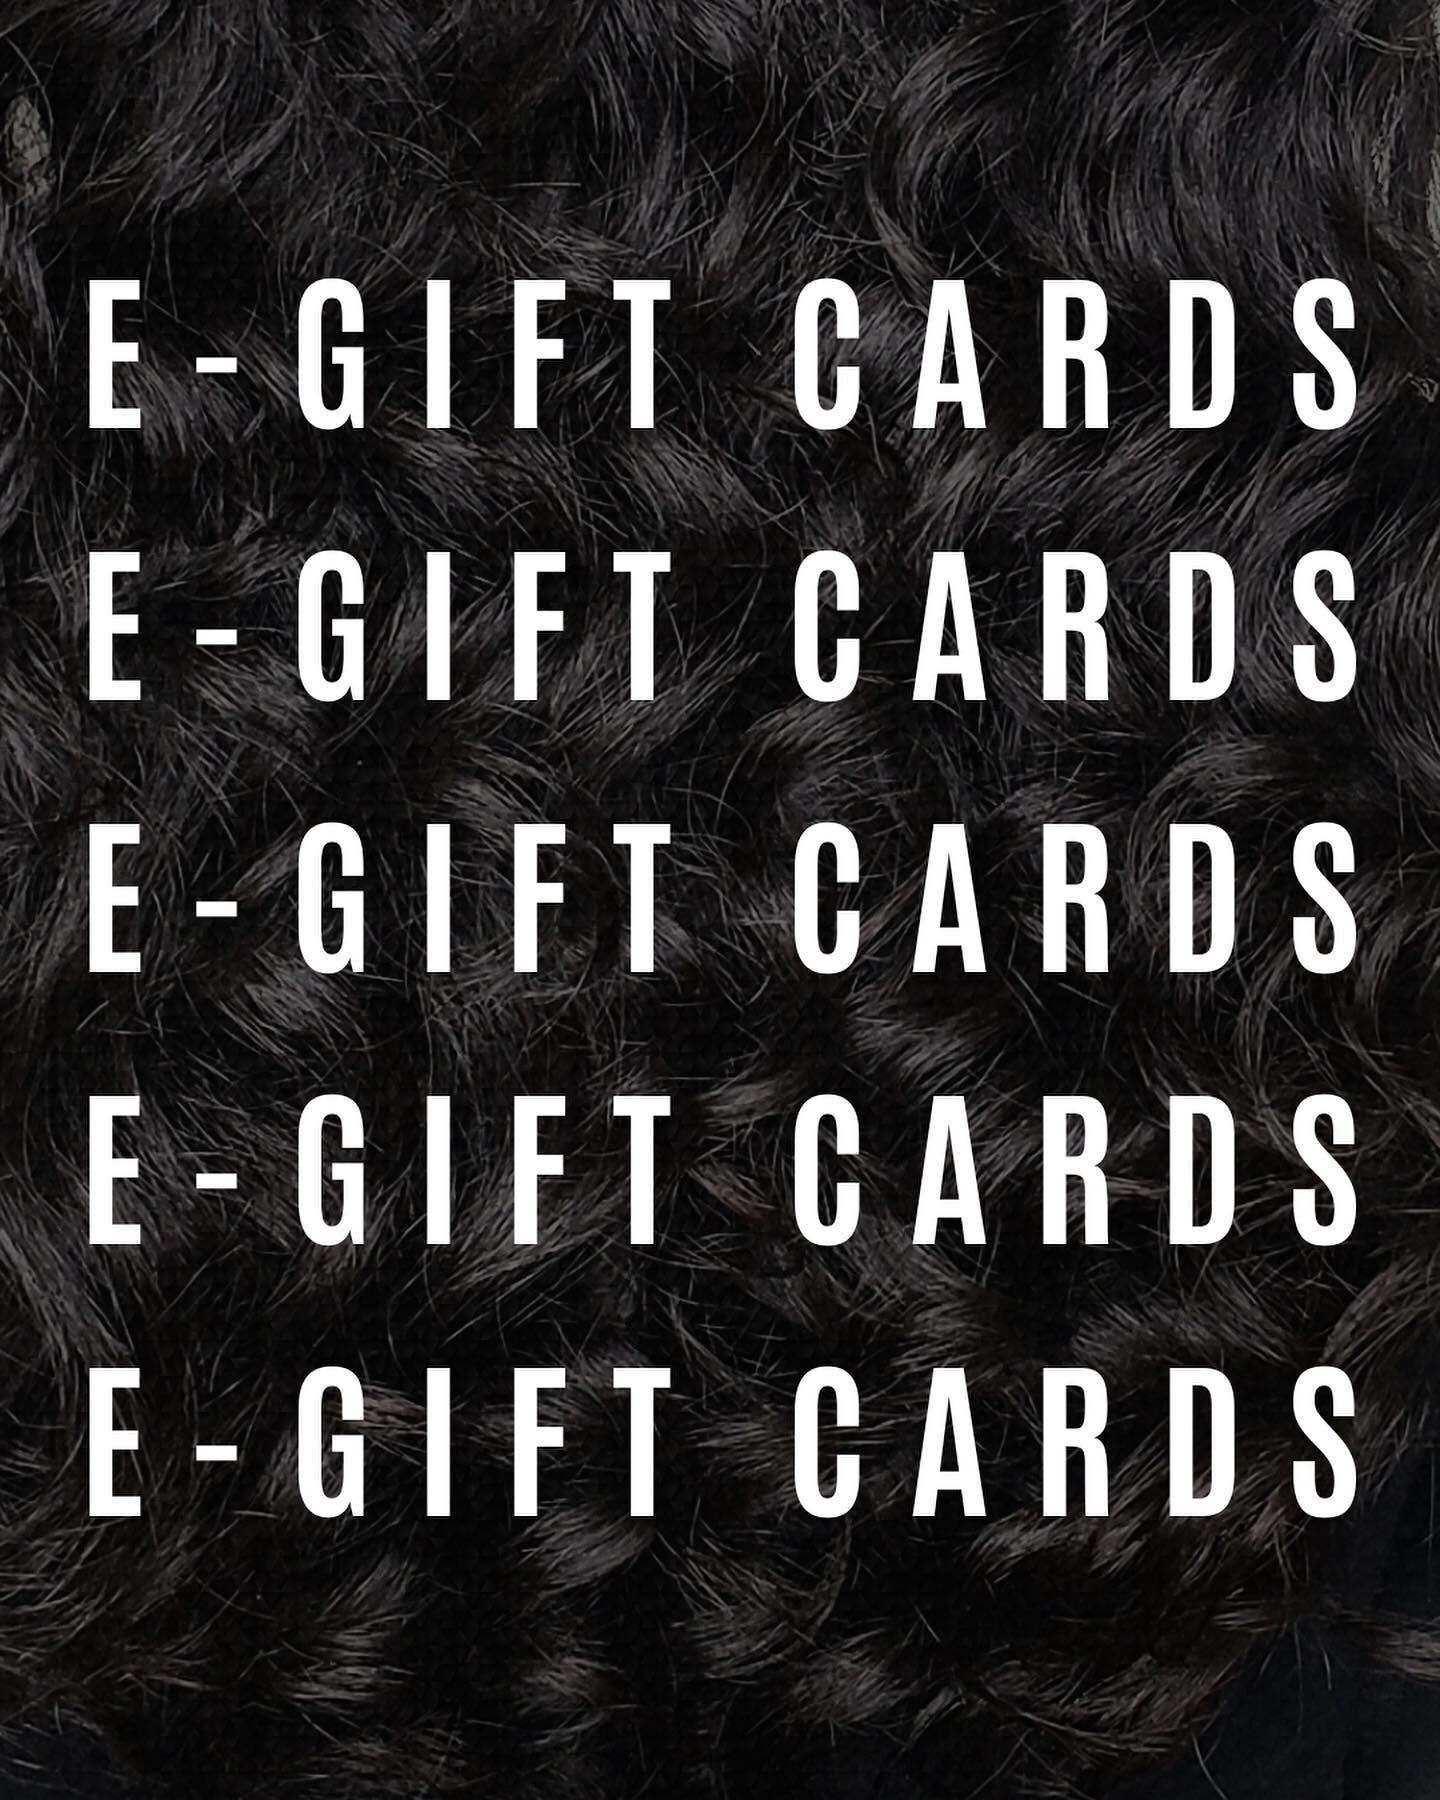 | U P D A T E: e-Gift cards expiration date
&bull;
&bull;
&bull;
Let us know if you have any questions. 🖤